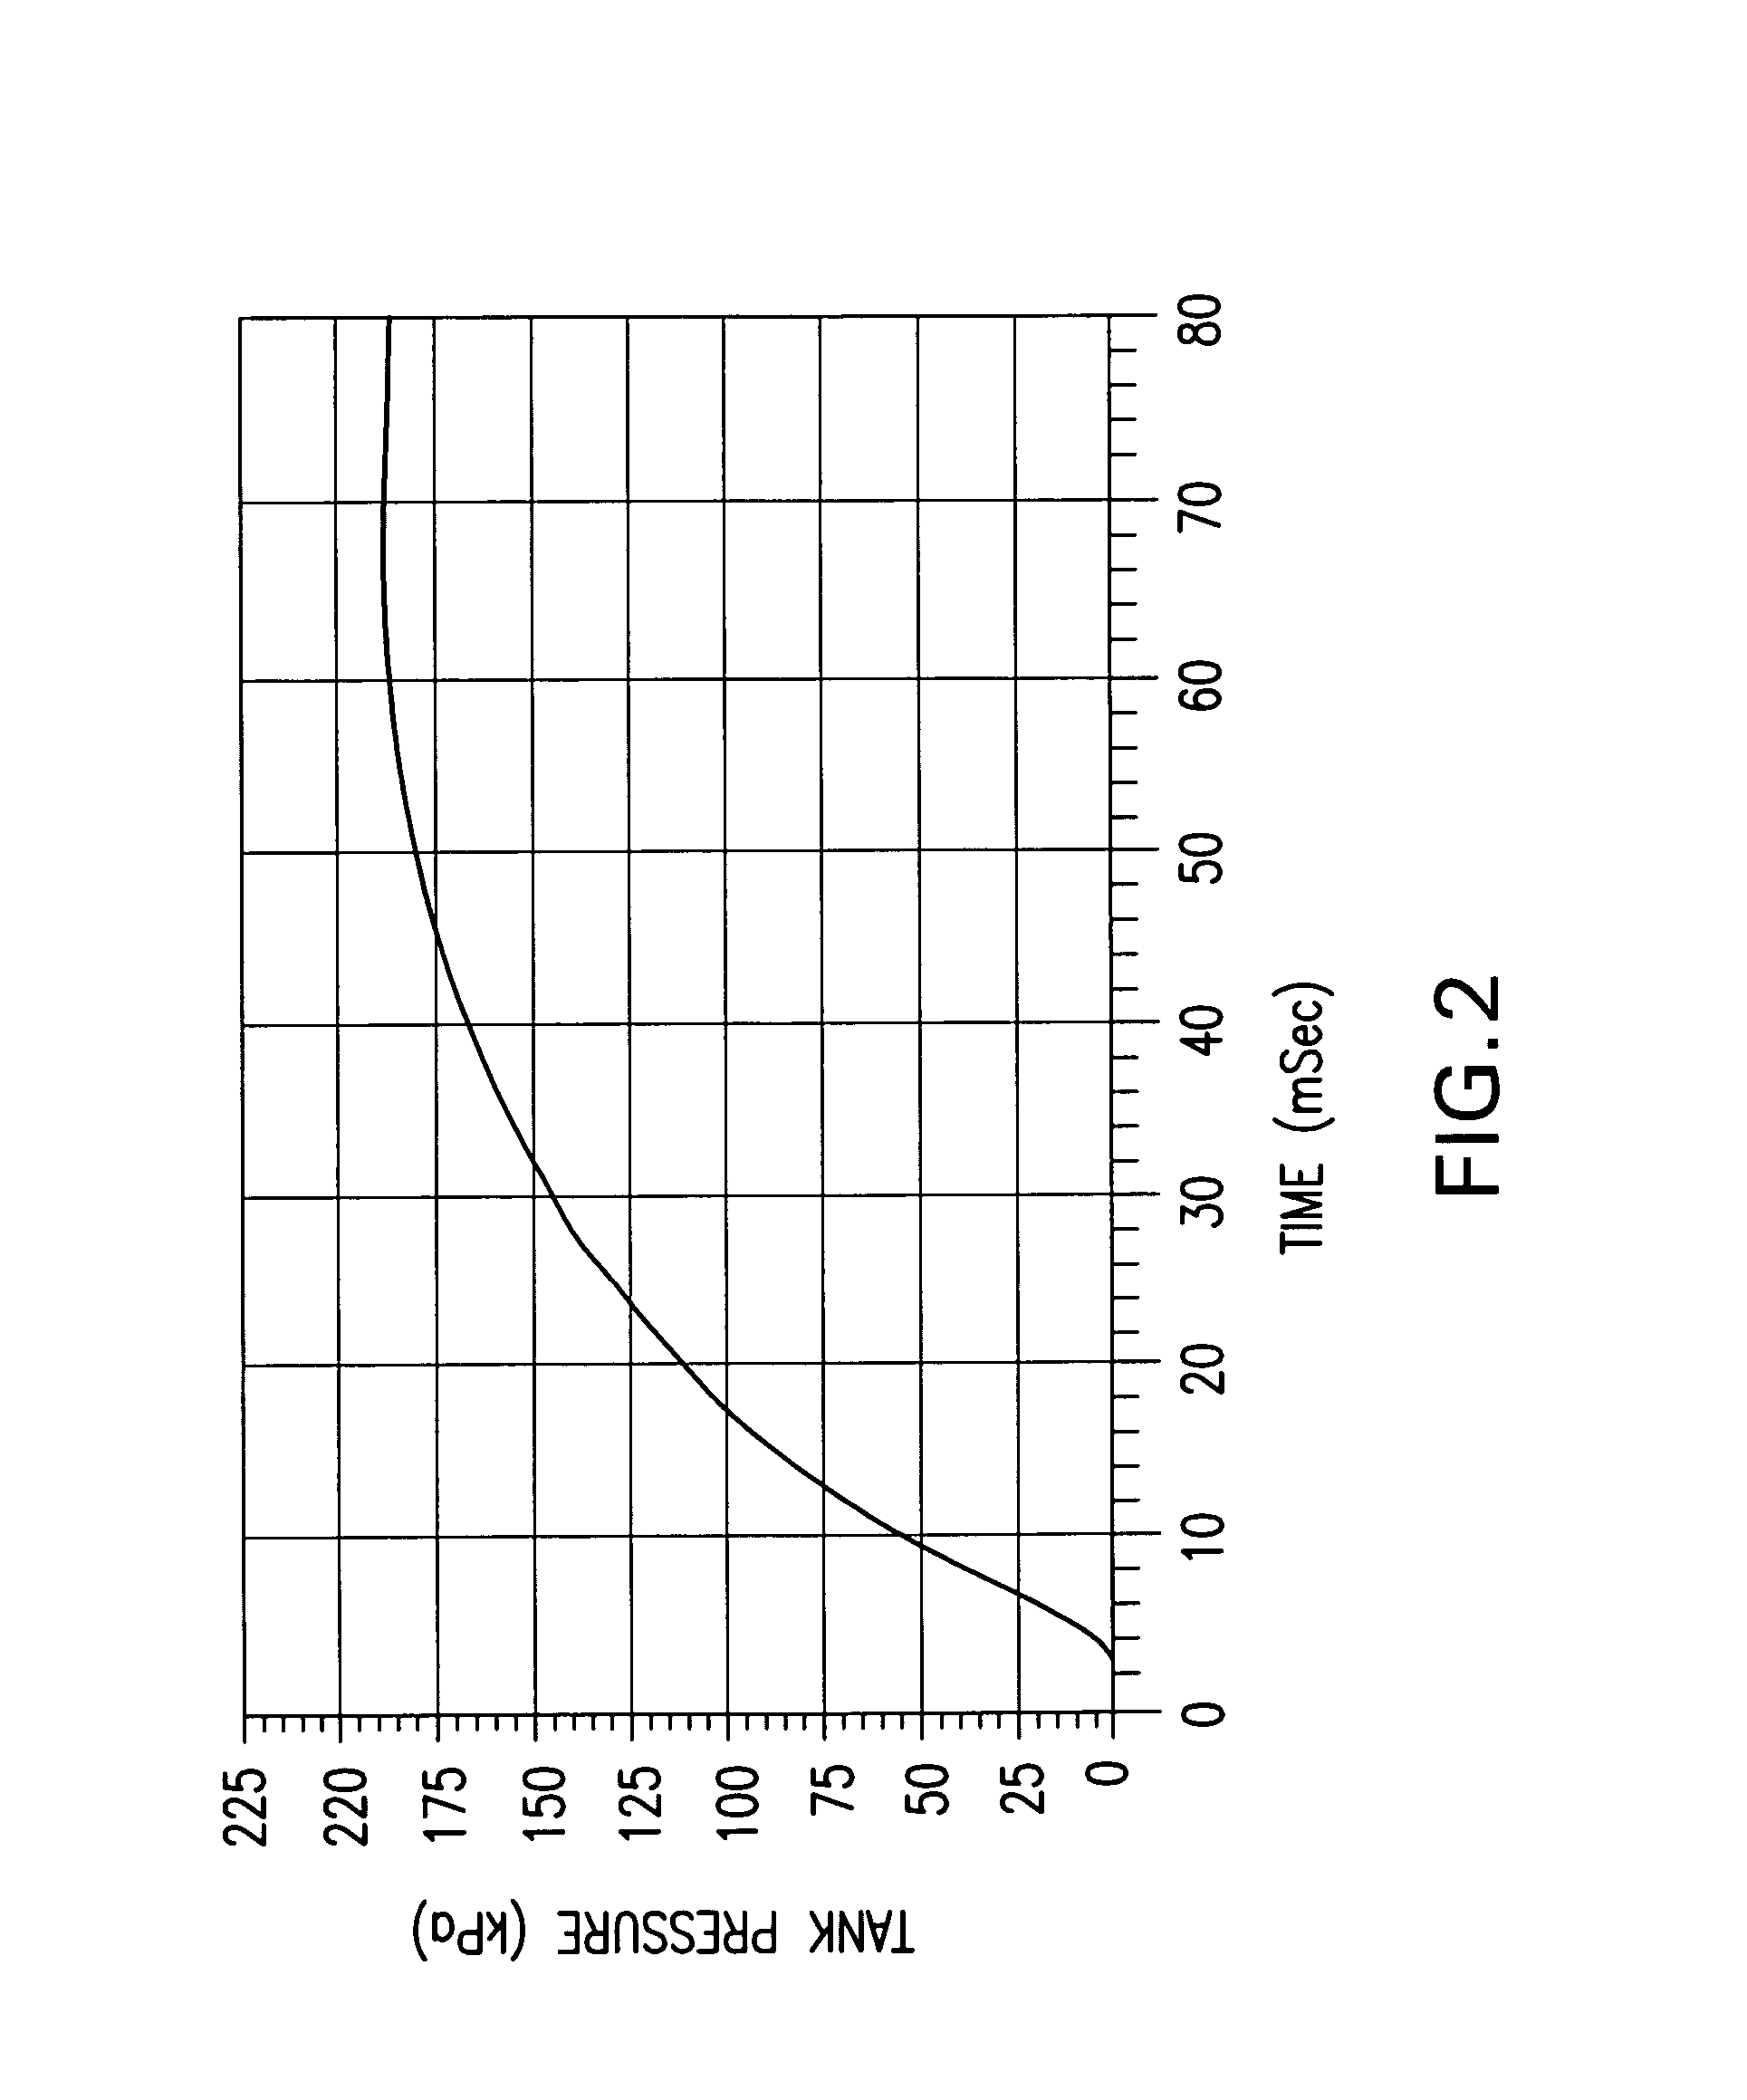 Gas generation with copper complexed imidazole and derivatives